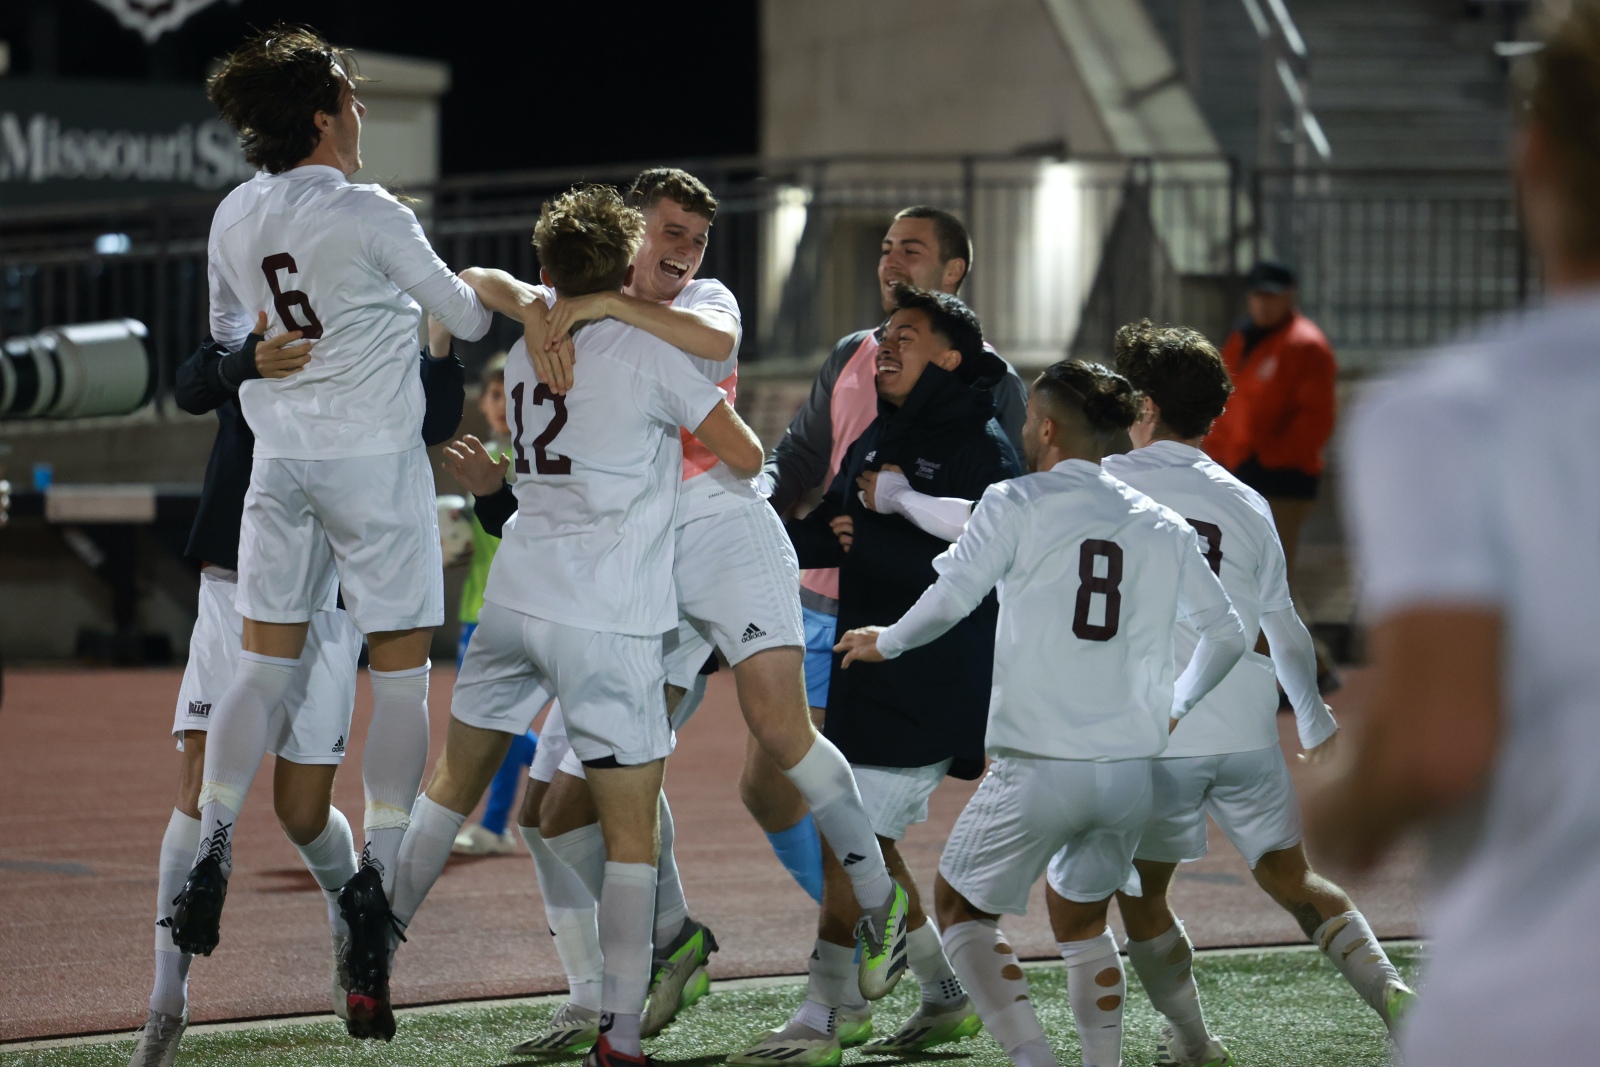 The Missouri State Bears soccer team celebrates after scoring a goal